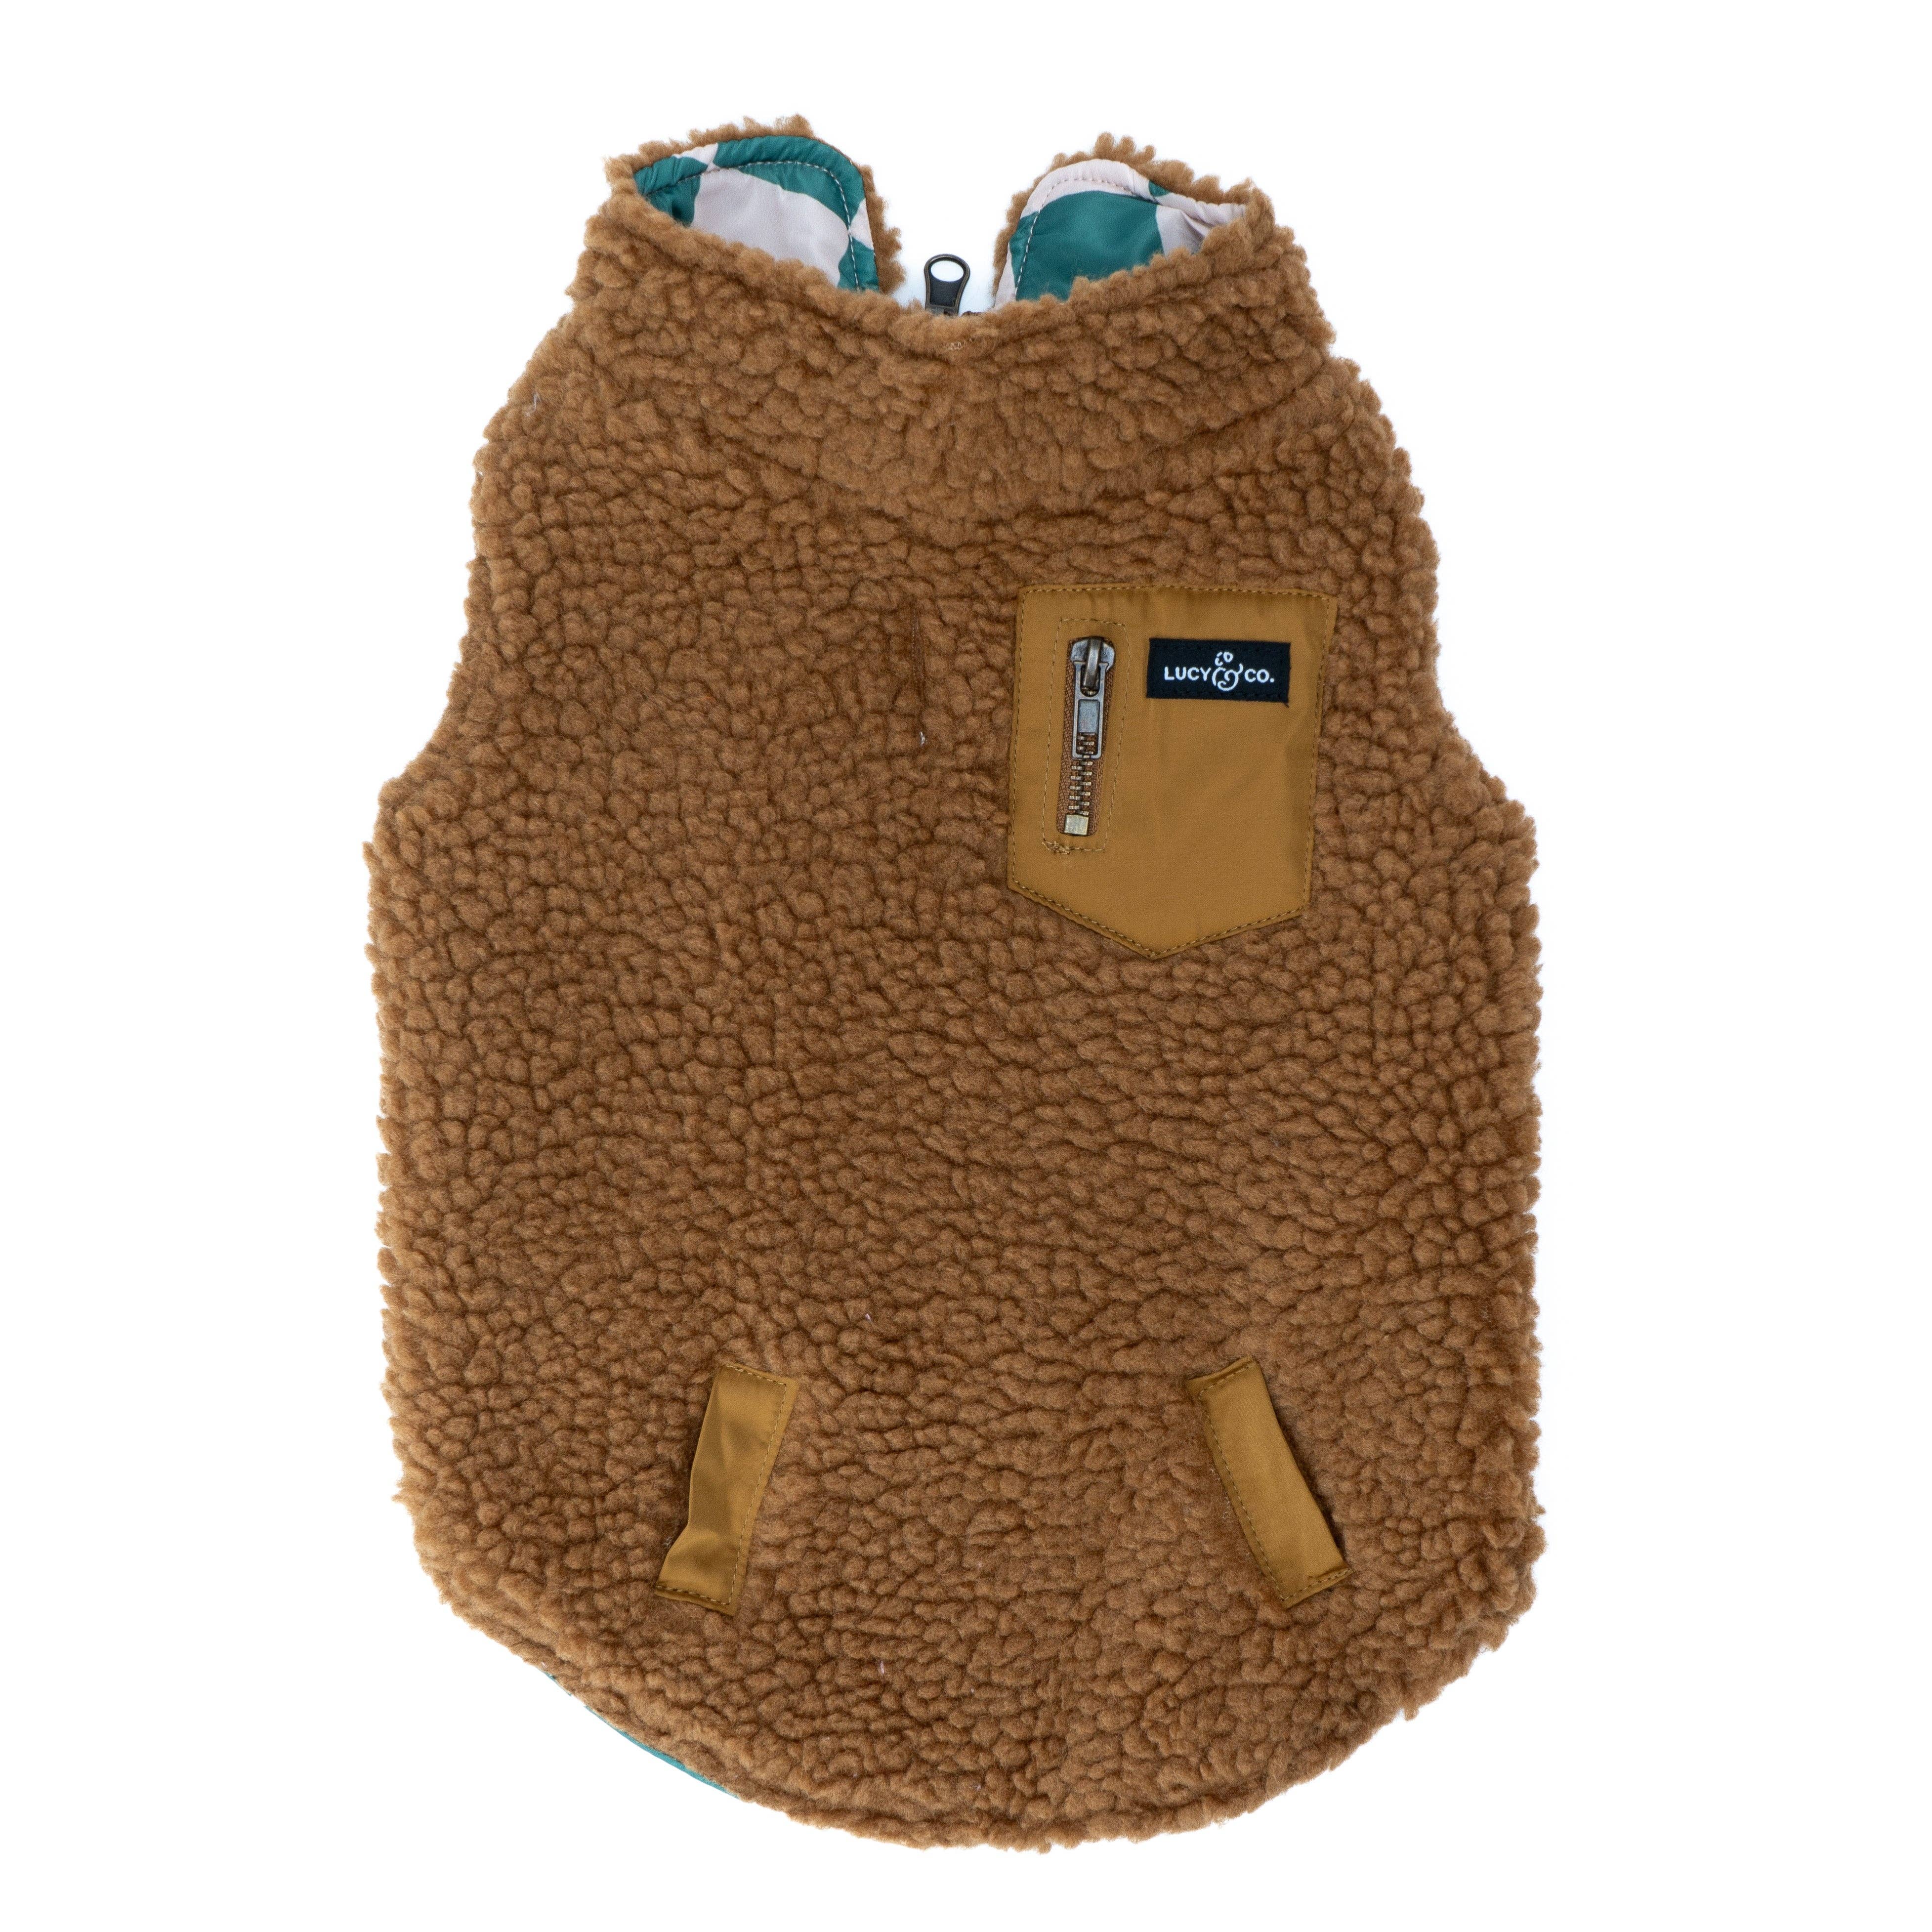 The You're a Square Reversible Teddy Vest: Medium